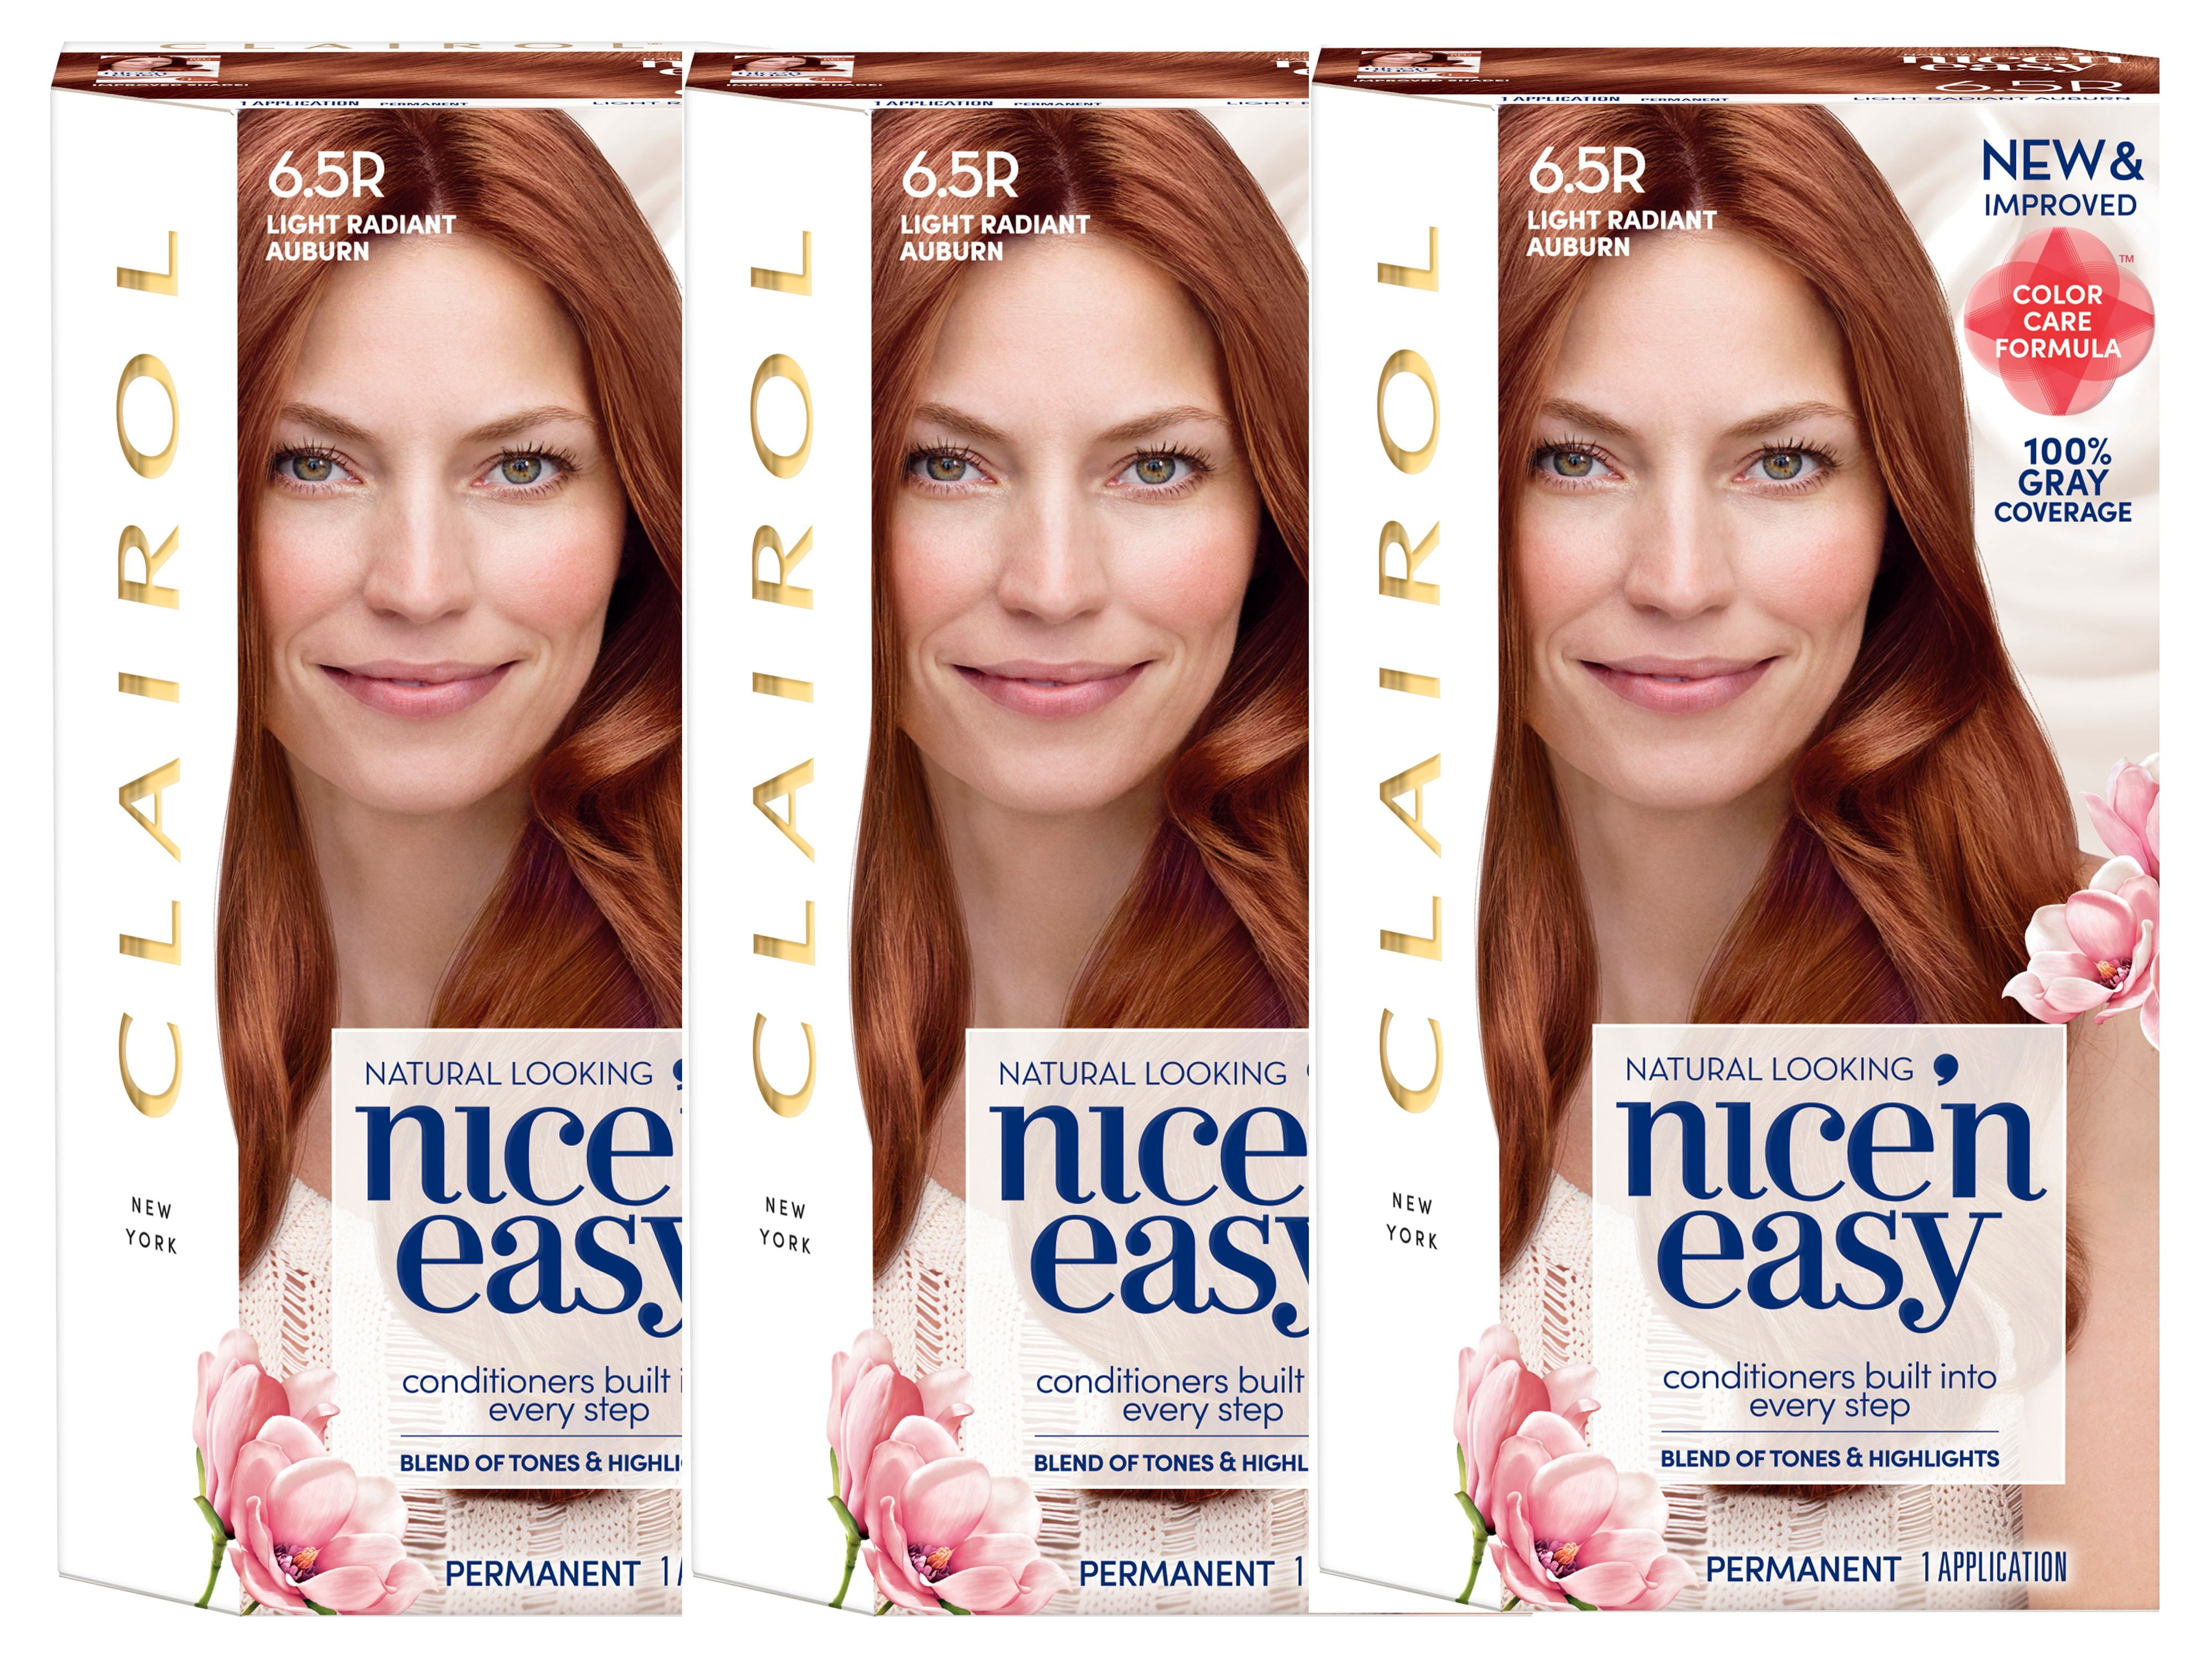 3. Clairol Nice'n Easy Permanent Hair Color, 9A Light Ash Blonde - wide 5